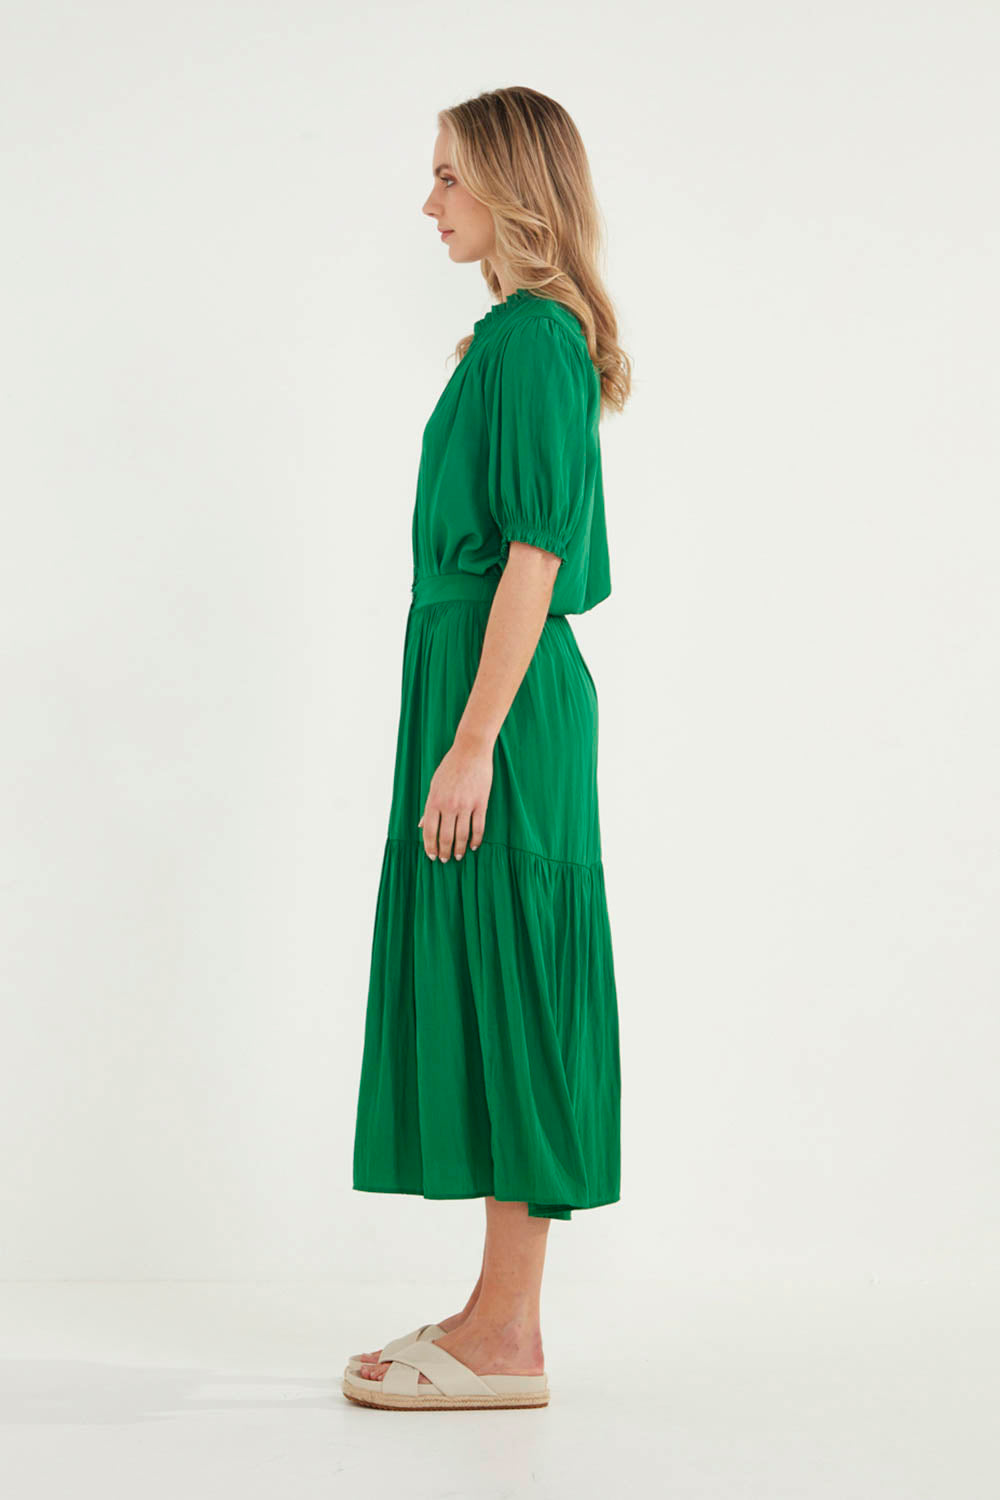 Glide by Verge - Reflection Top - Emerald - VERGE